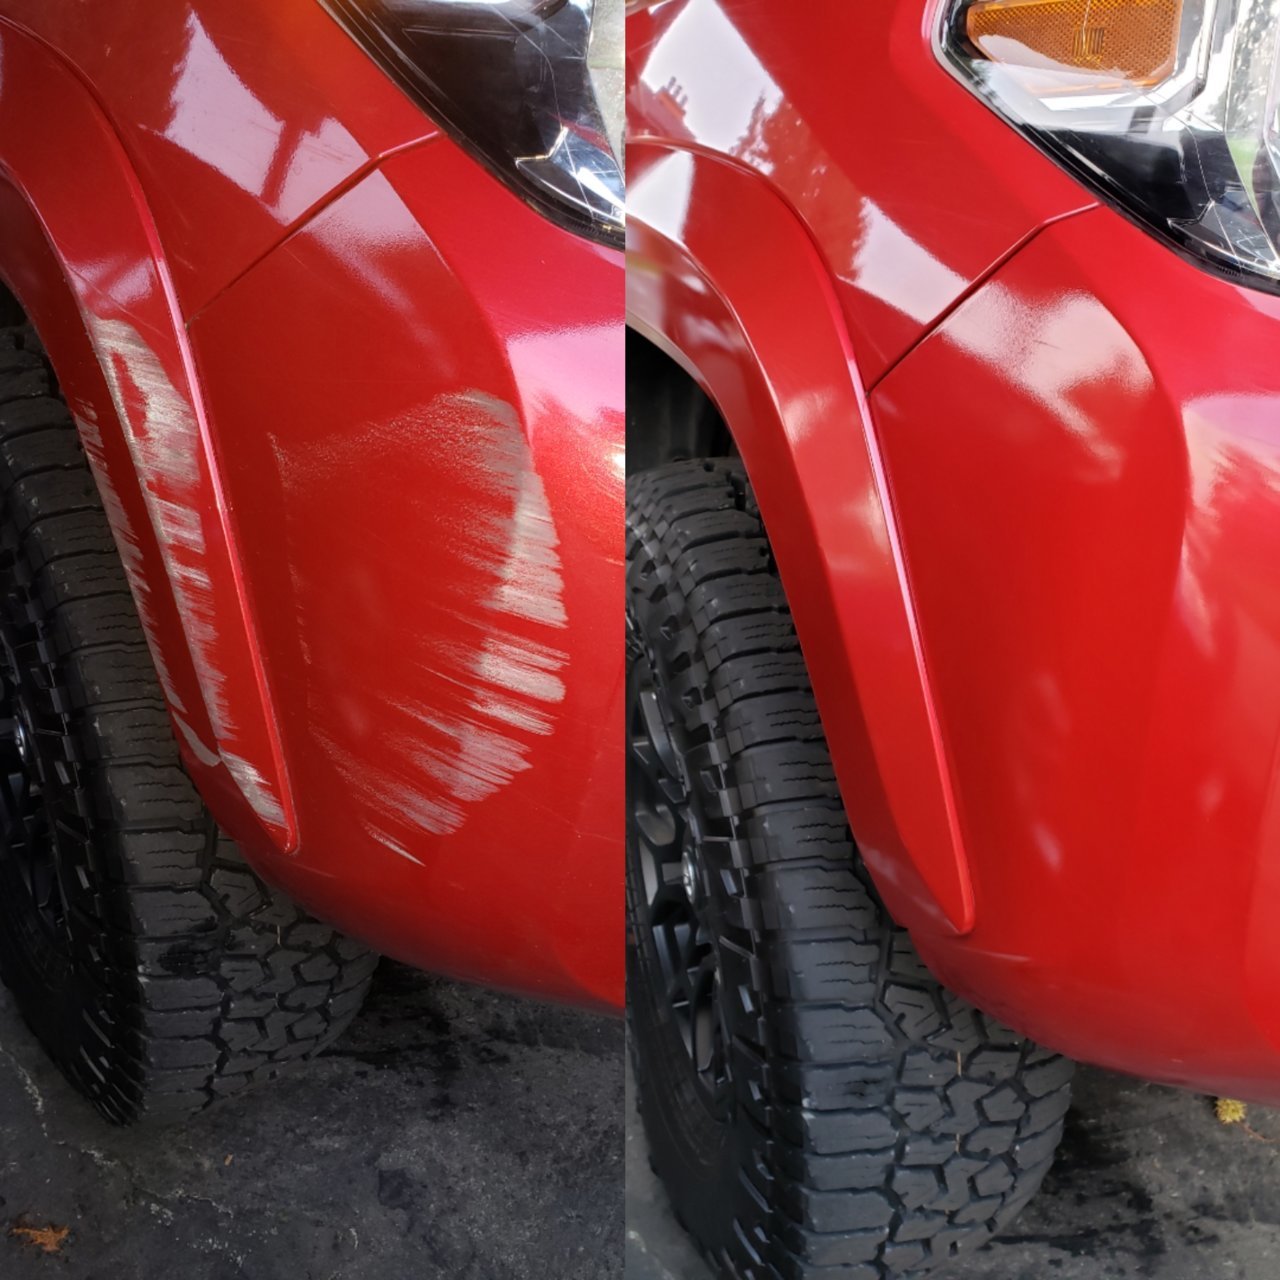 Meguiars scratch remover saved me!